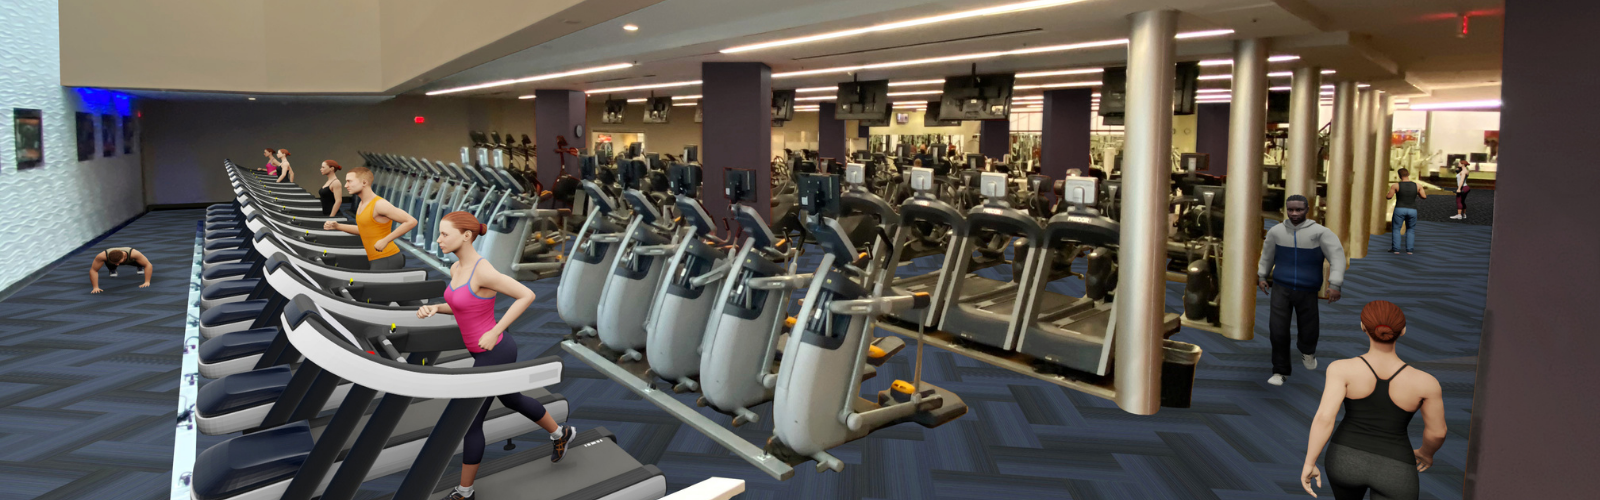 On the up: Herndon’s Worldgate Athletic Club and Spa gets state-of-the-art update